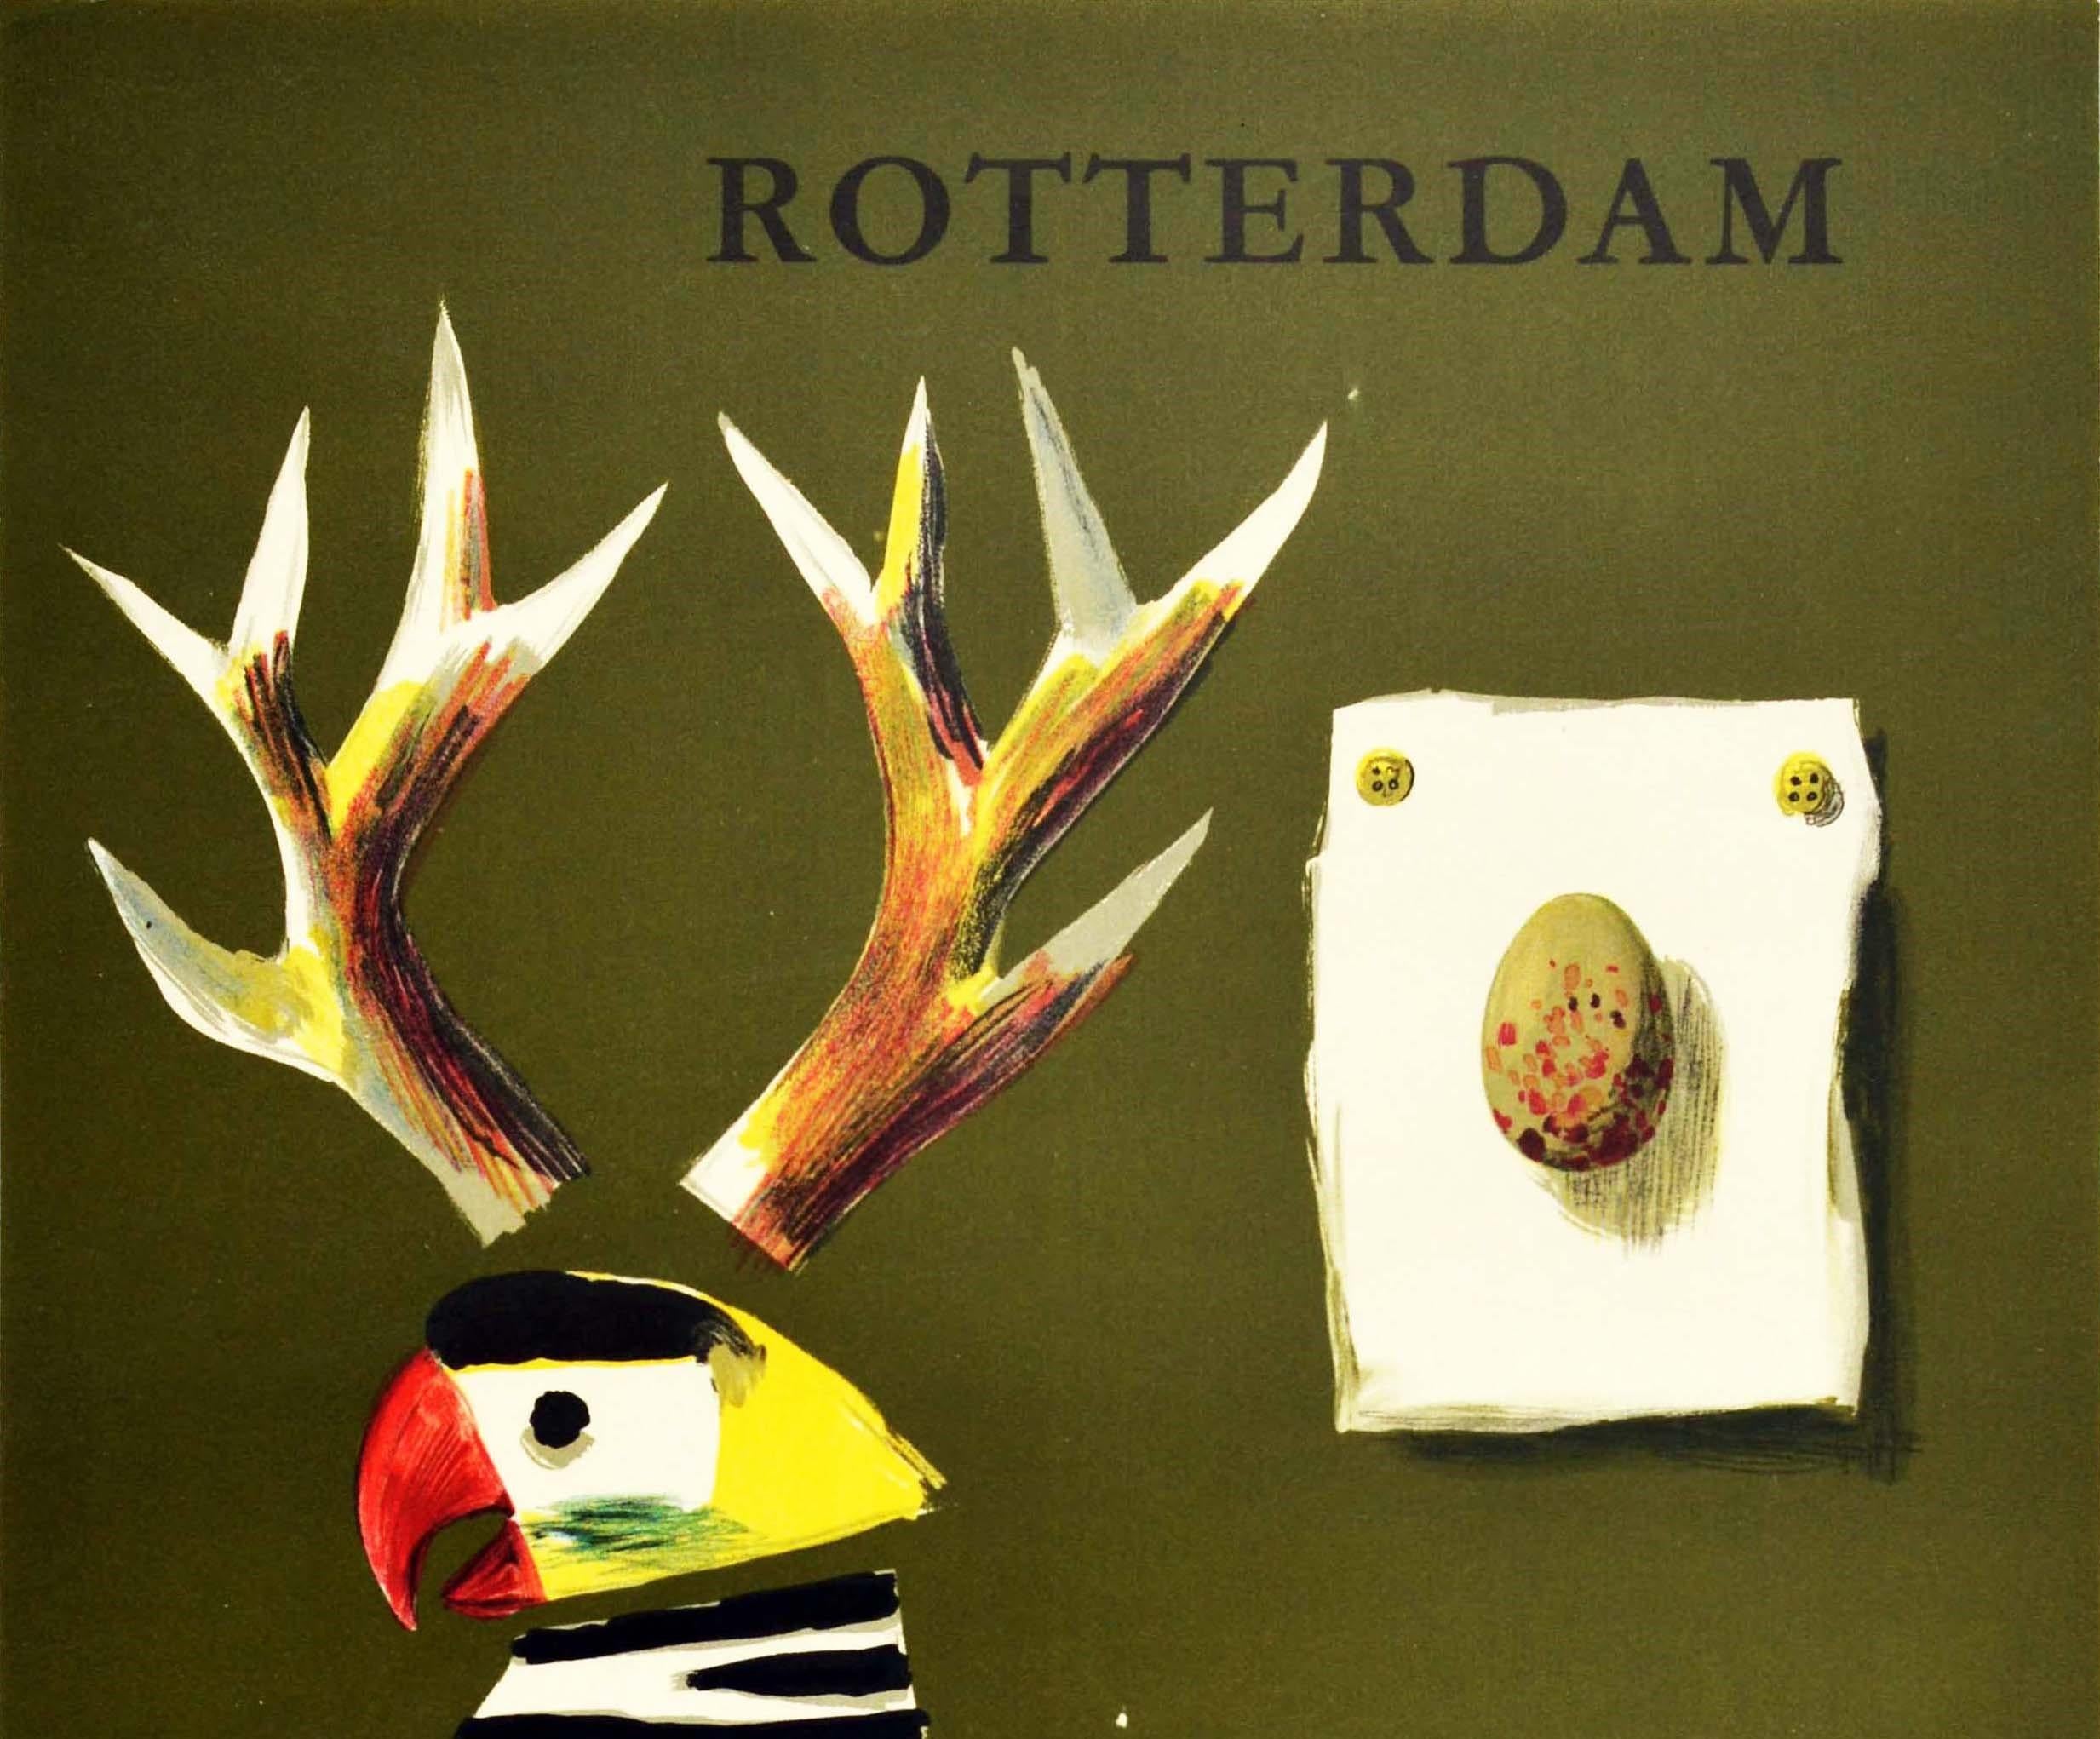 Original vintage travel poster advertising Rotterdam le zoo moderne / the modern zoo. Fun design by Kees van Roemburg (1915-2002) mimicking abstract art depicts a bird-like shape composed of various animals - the horns of a deer above the head of a